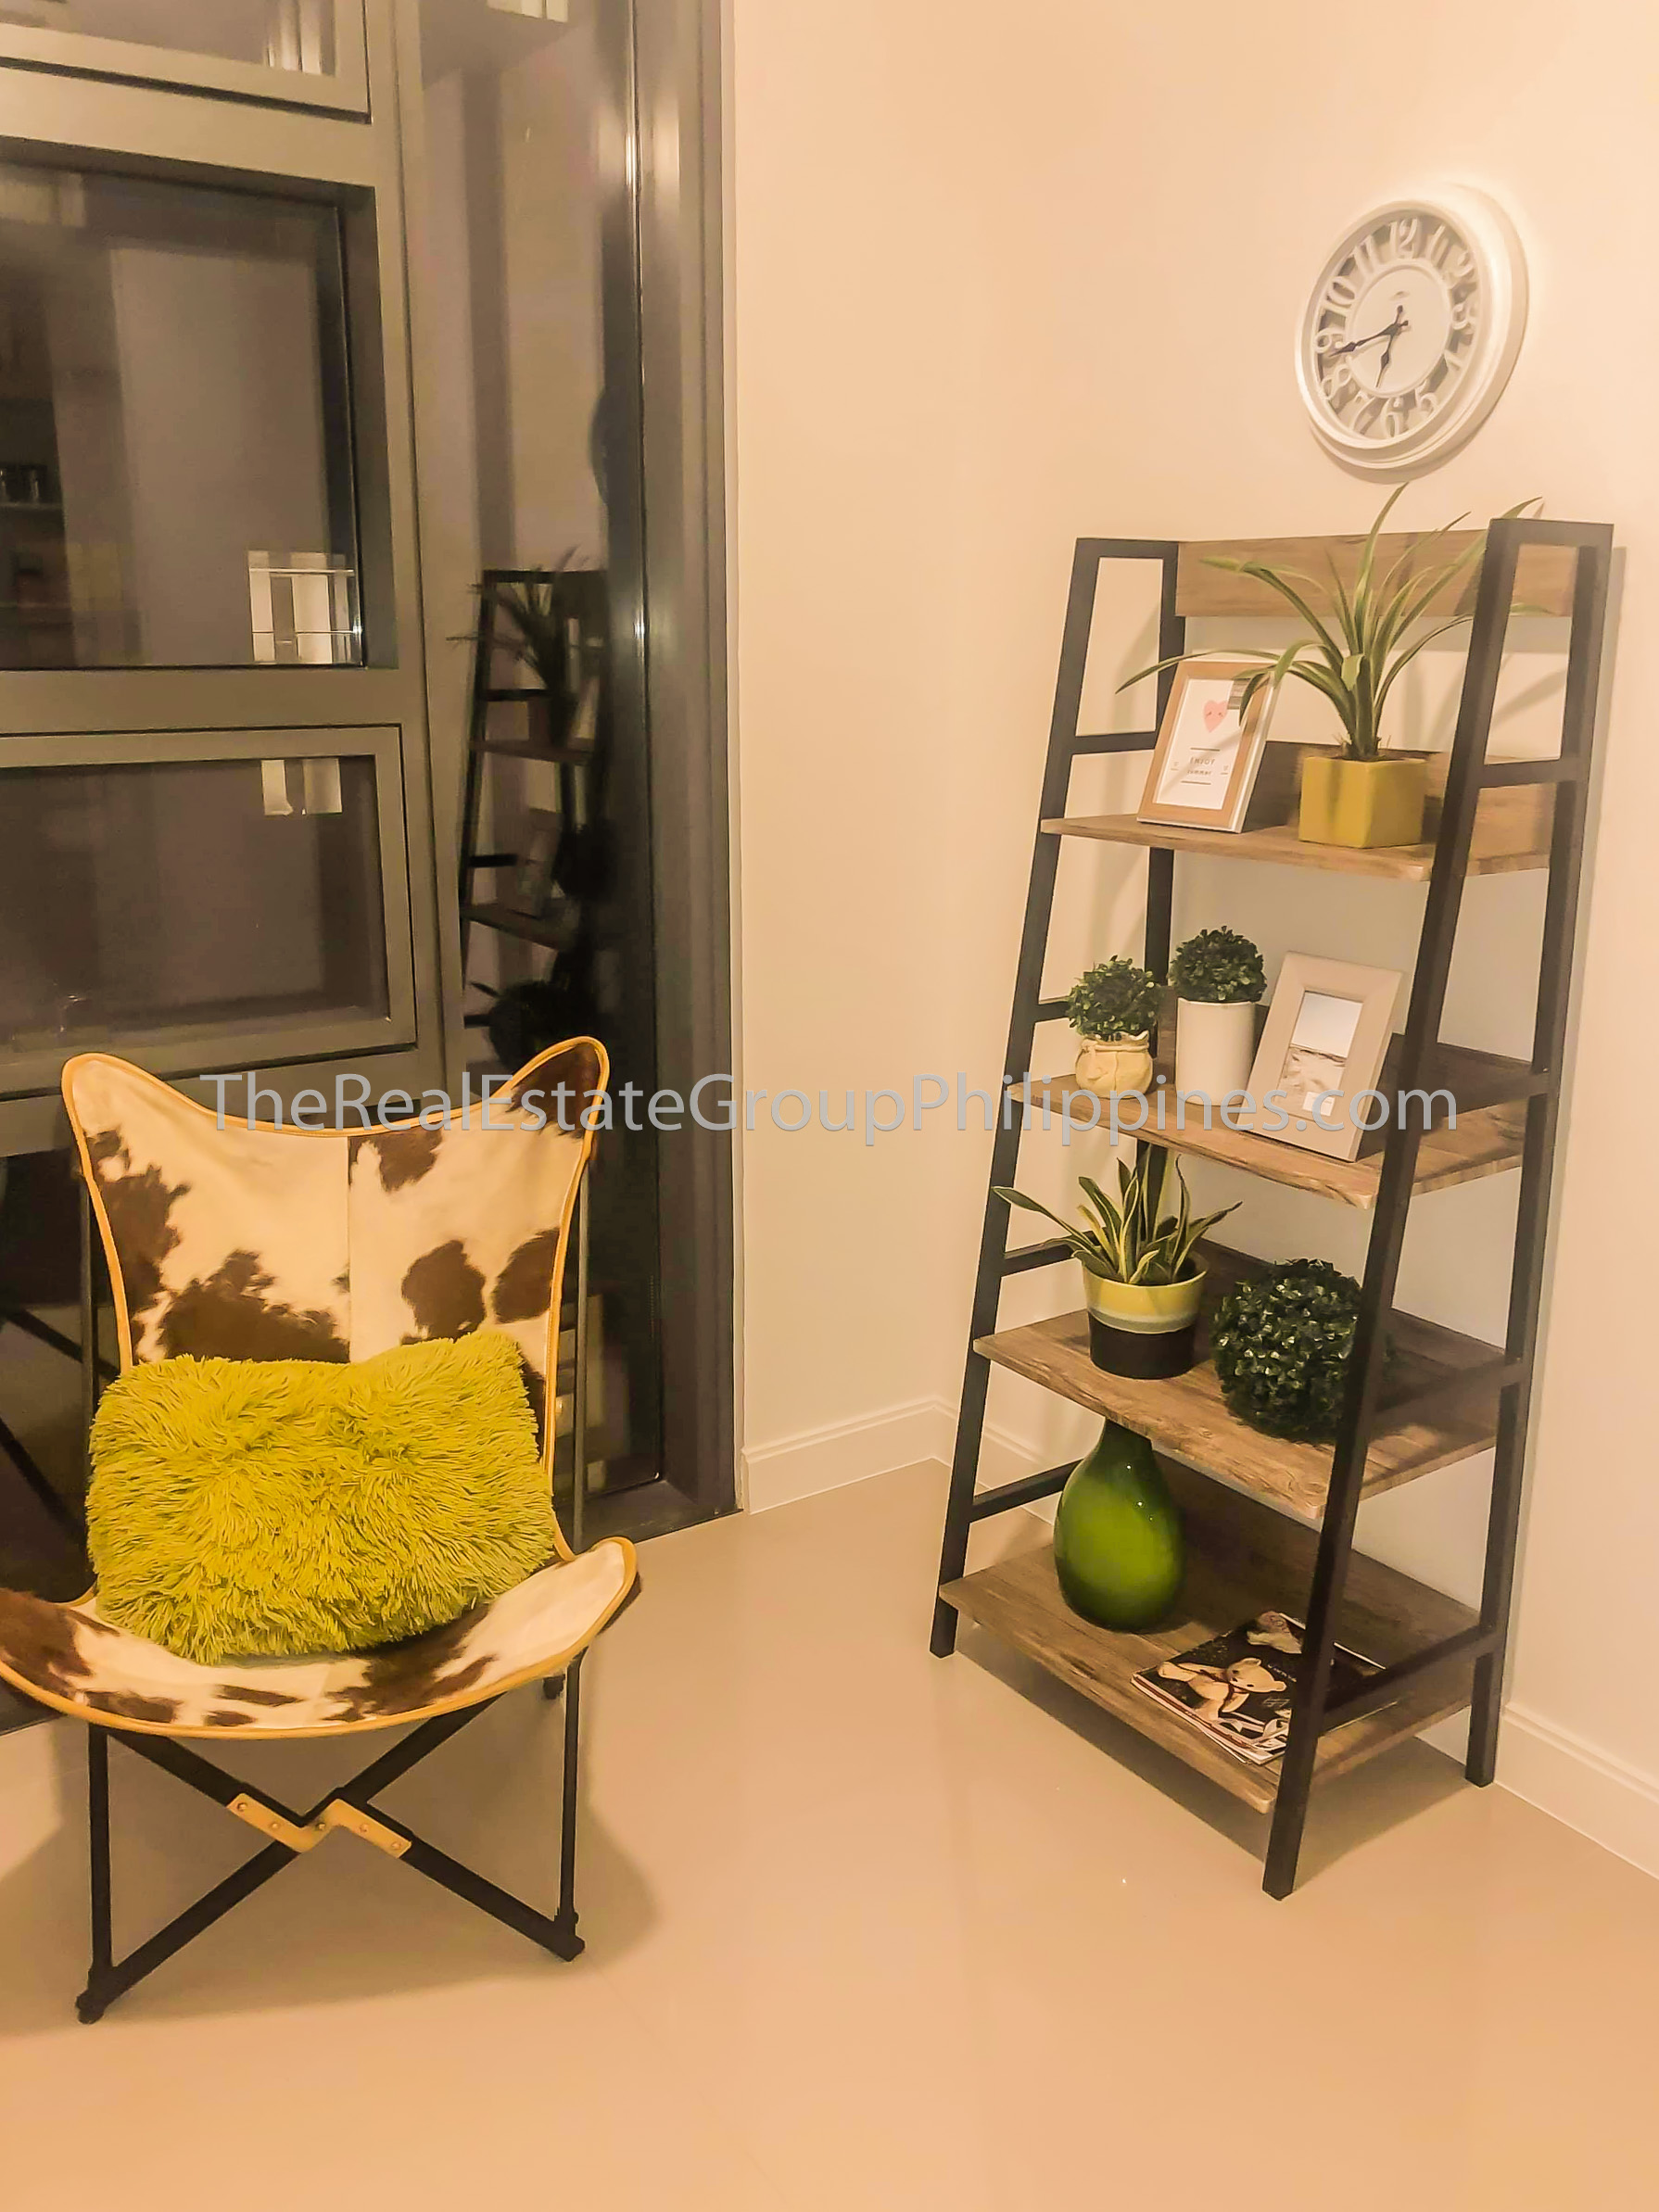 1BR Condo For Rent Lease Arbor Lanes, Arca South, Taguig (6 of 13)